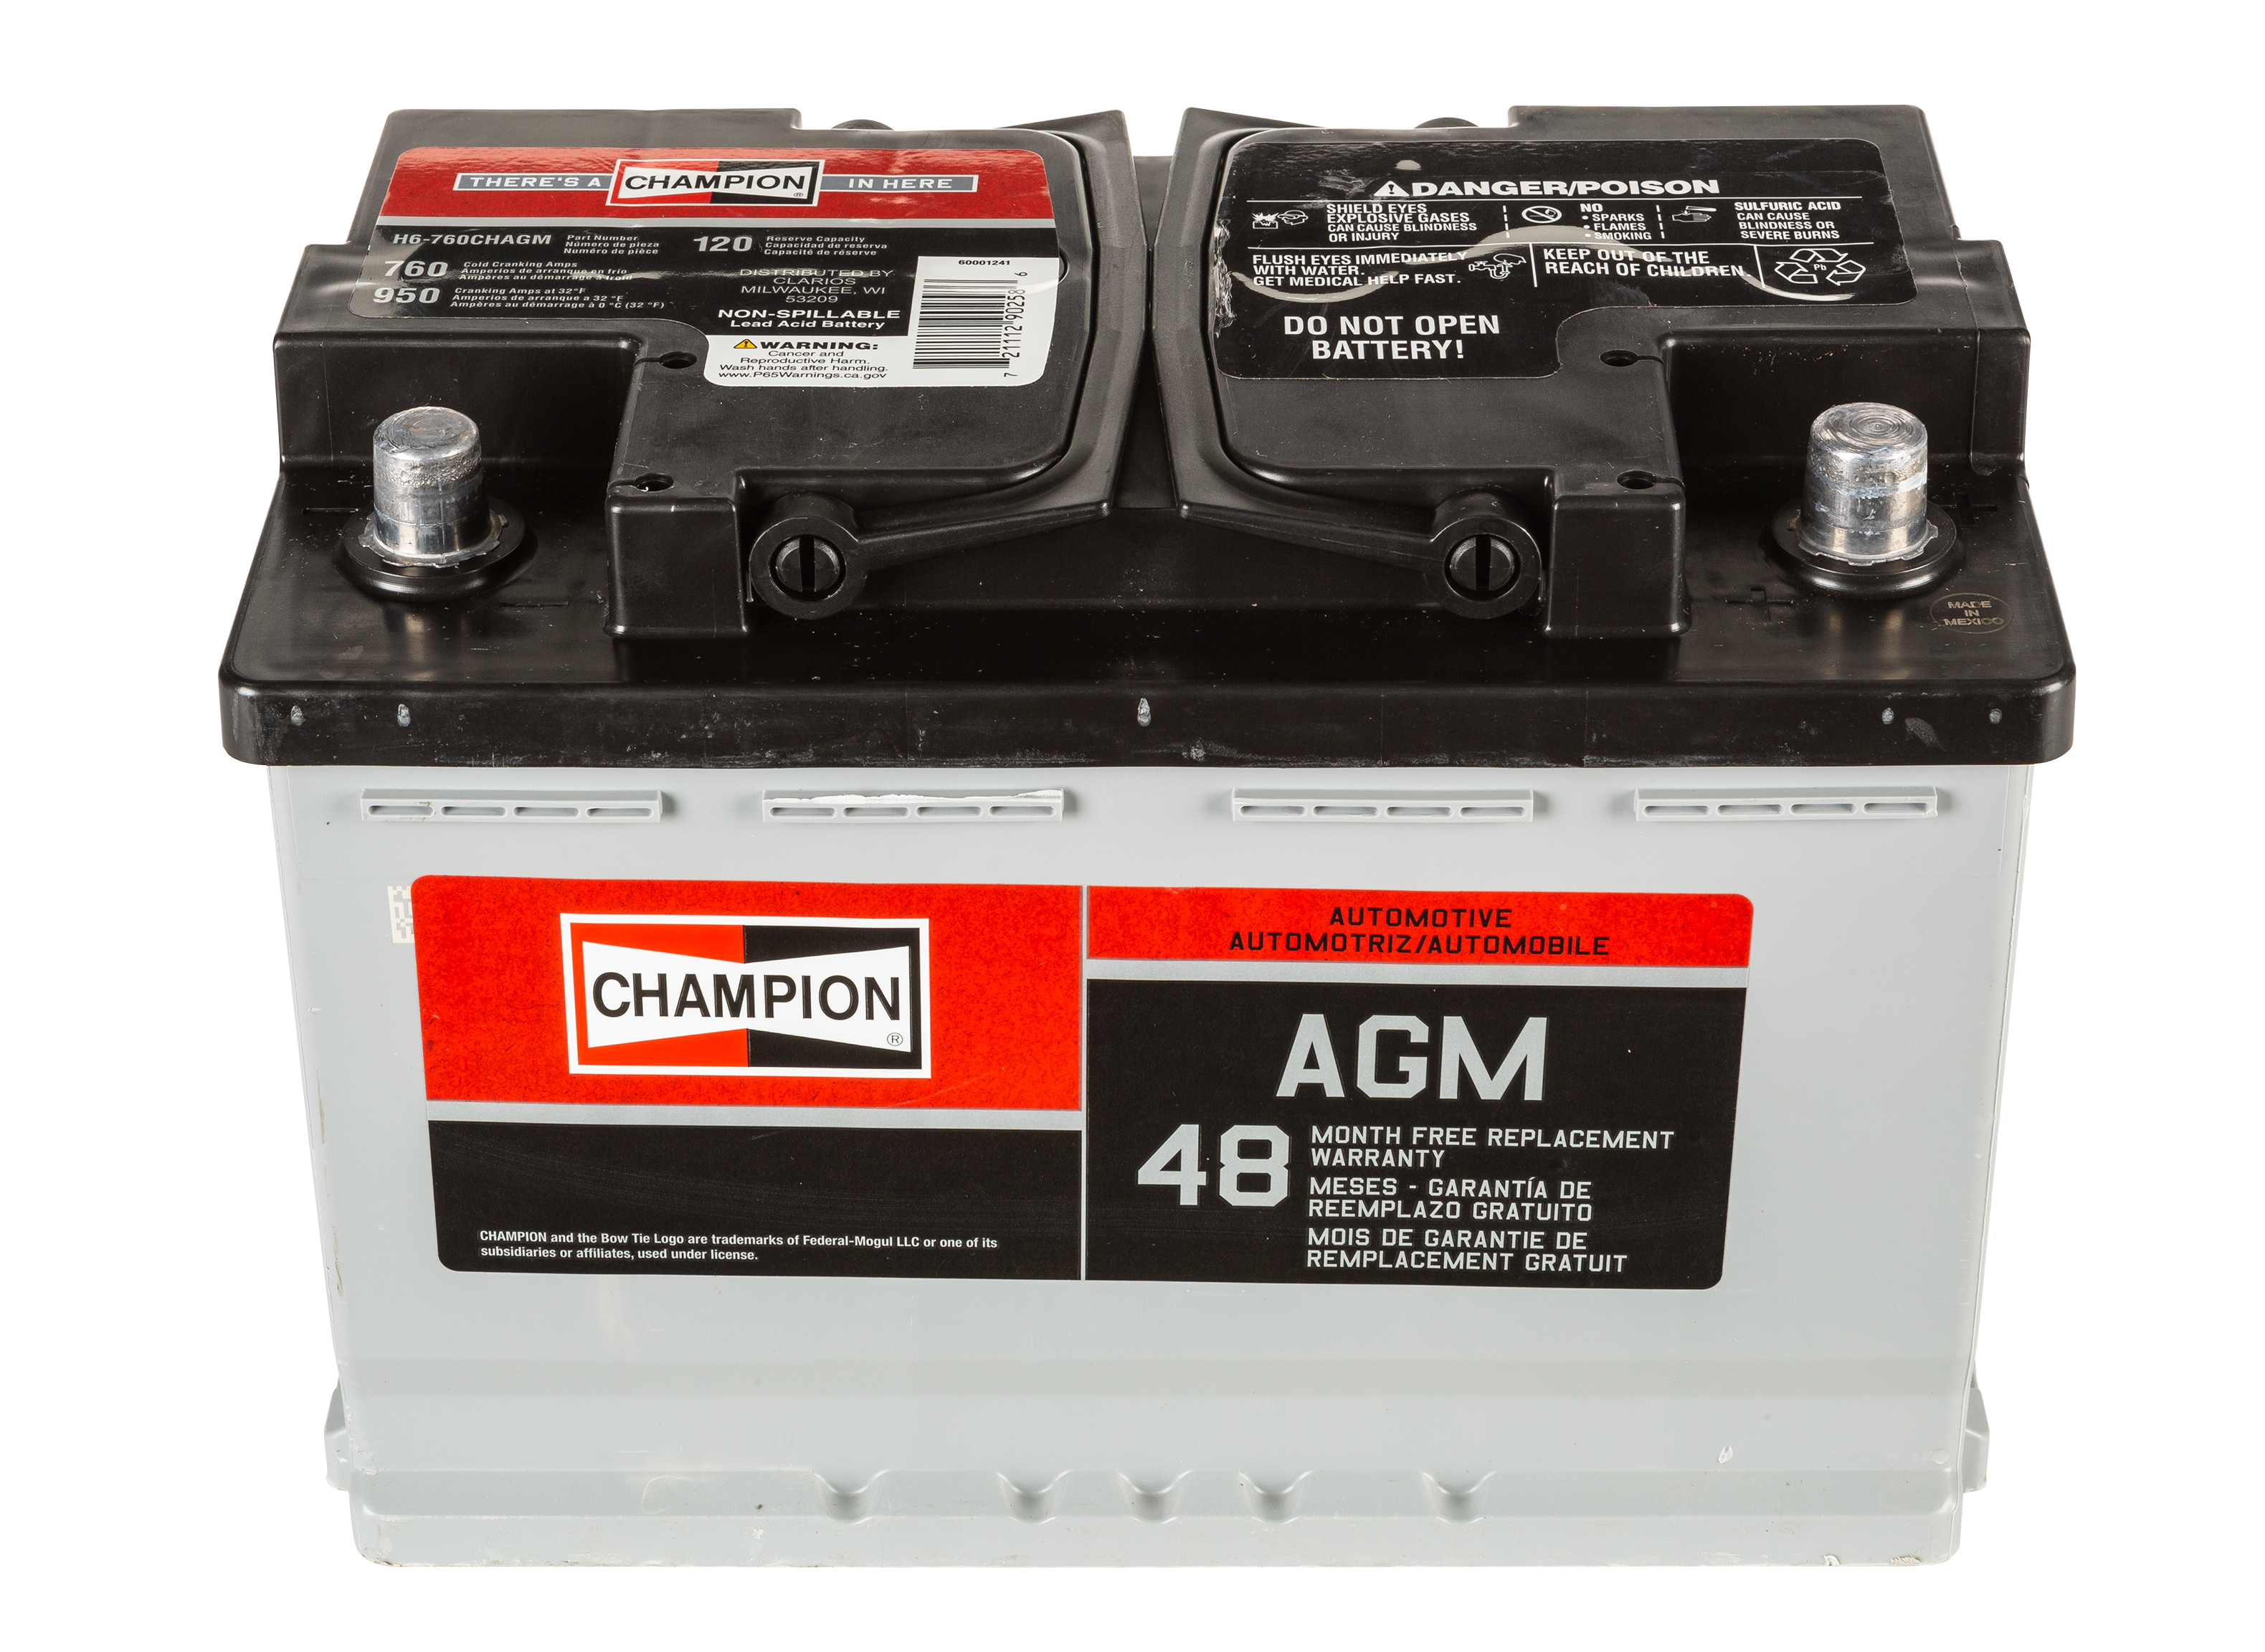 Champion AGM H6-760CHAGM Car Battery Review - Consumer Reports